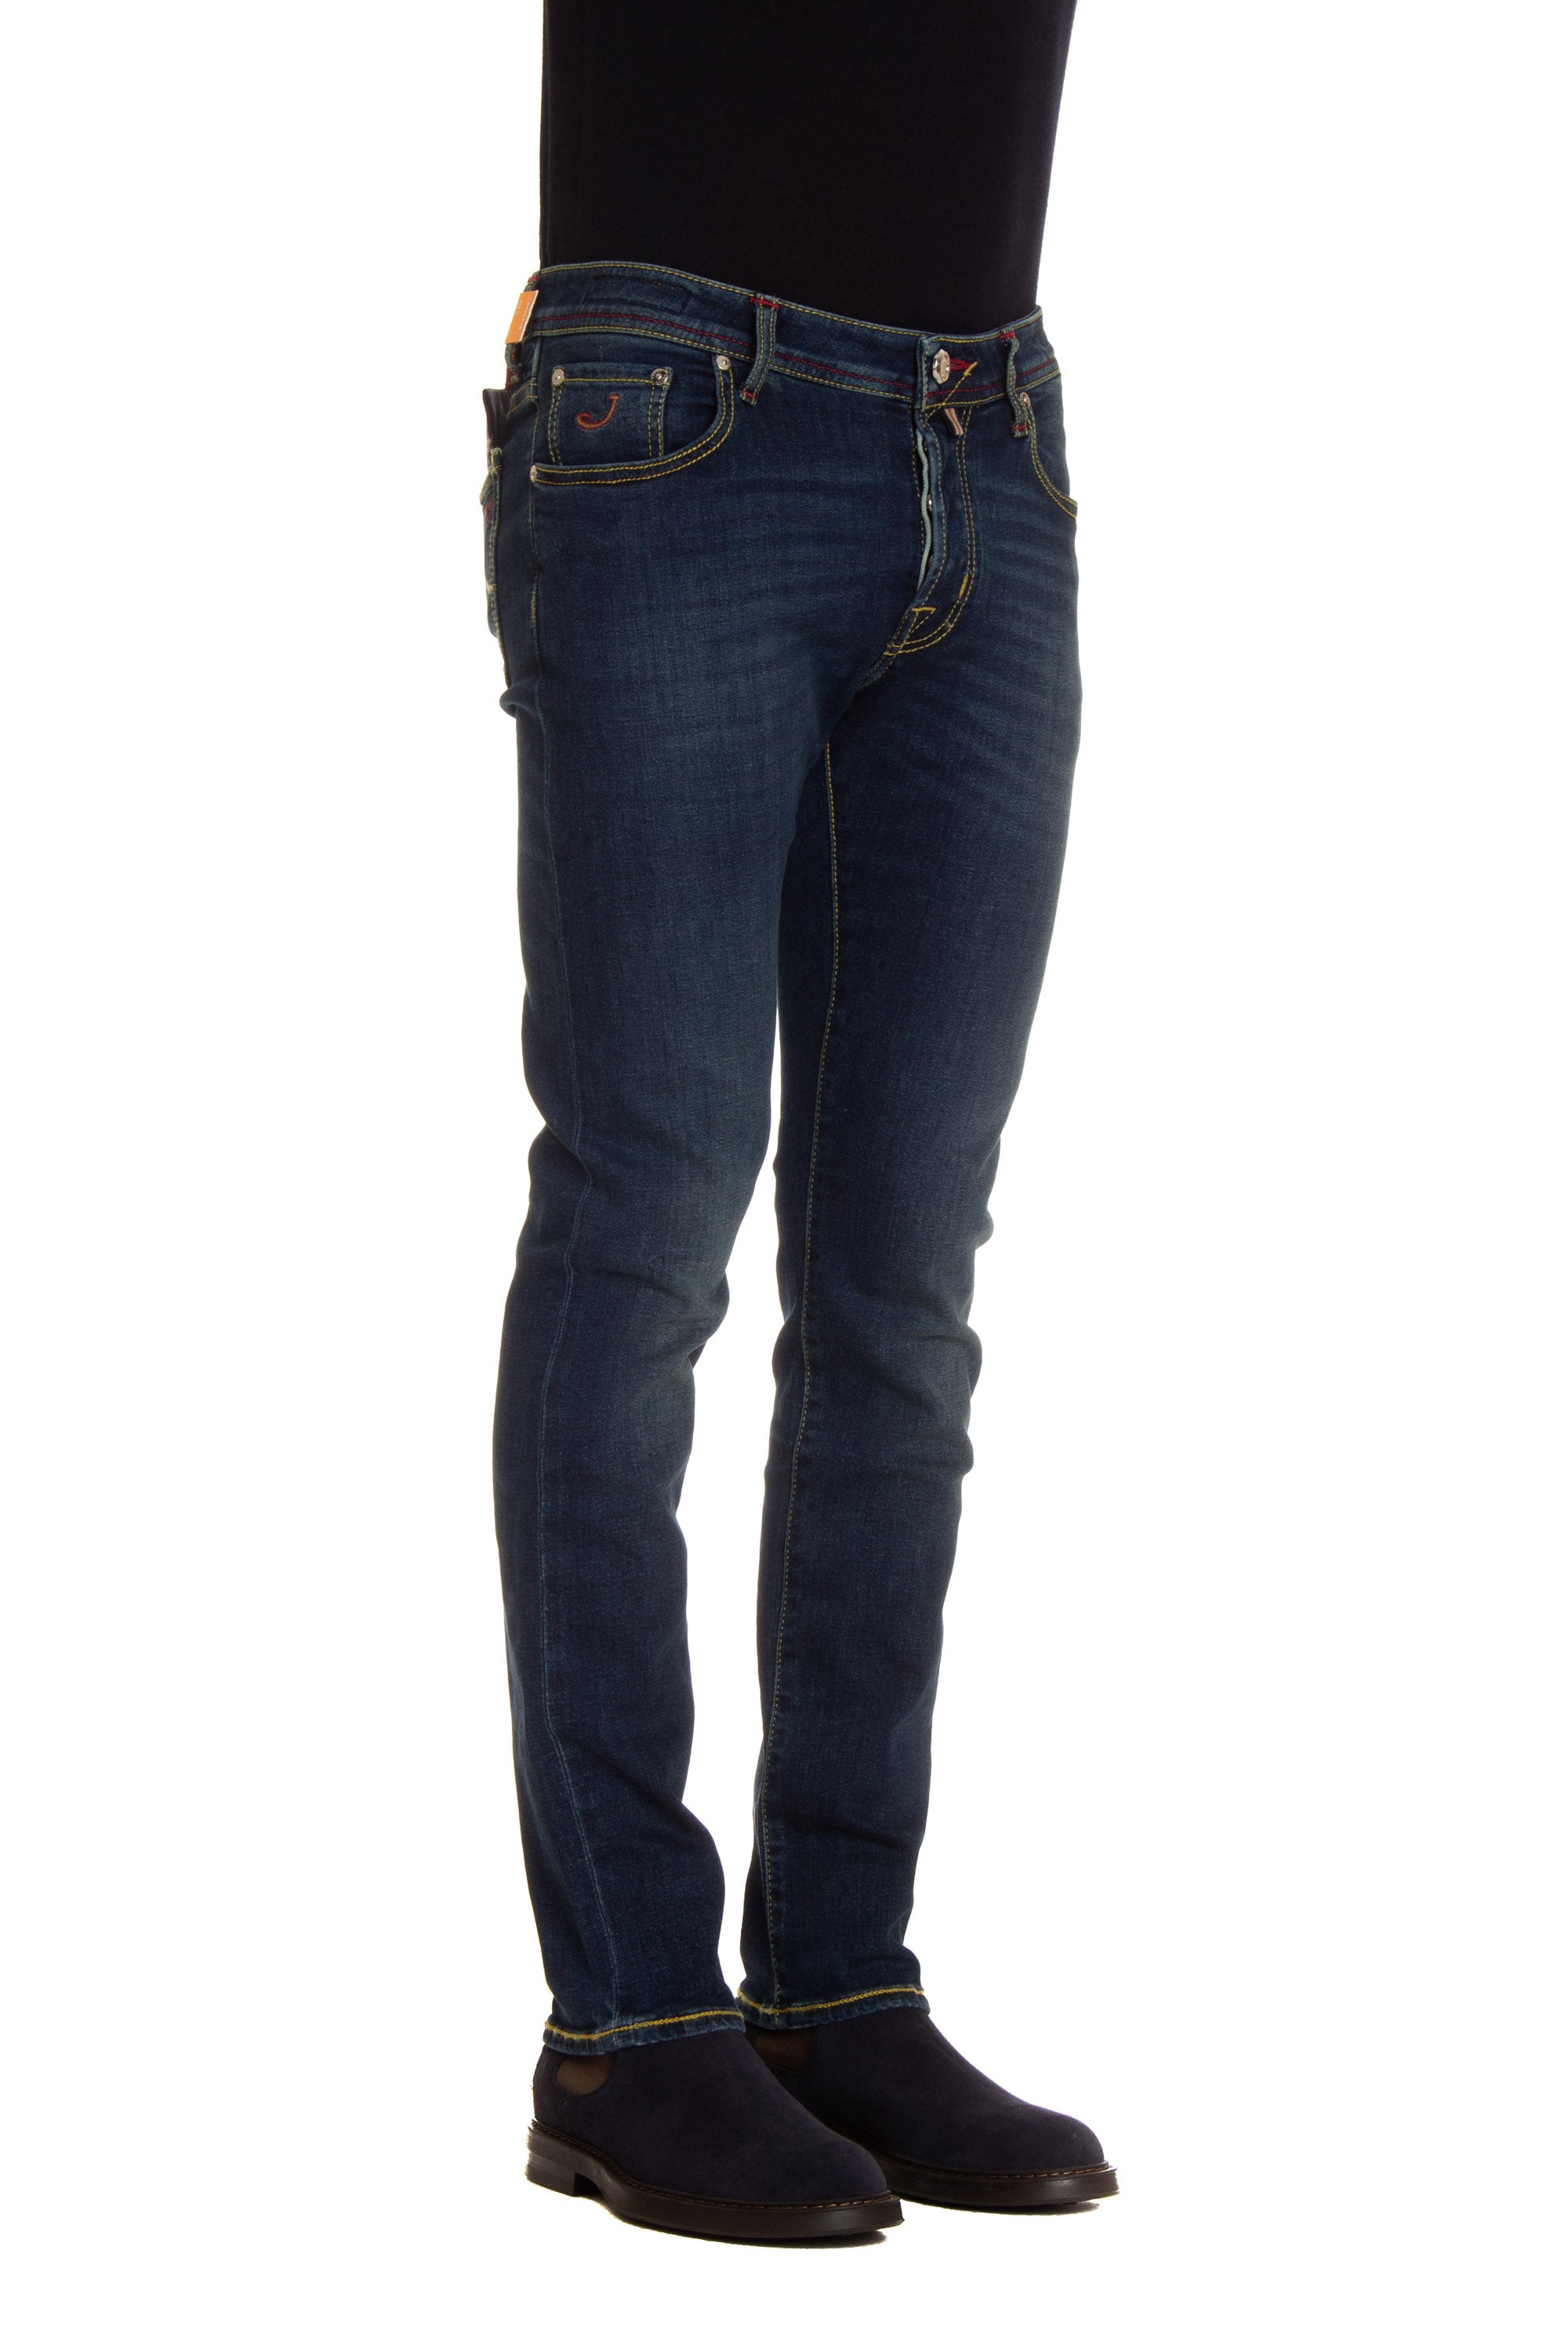 Jeans Limited Edition etichetta rossa Nick fit